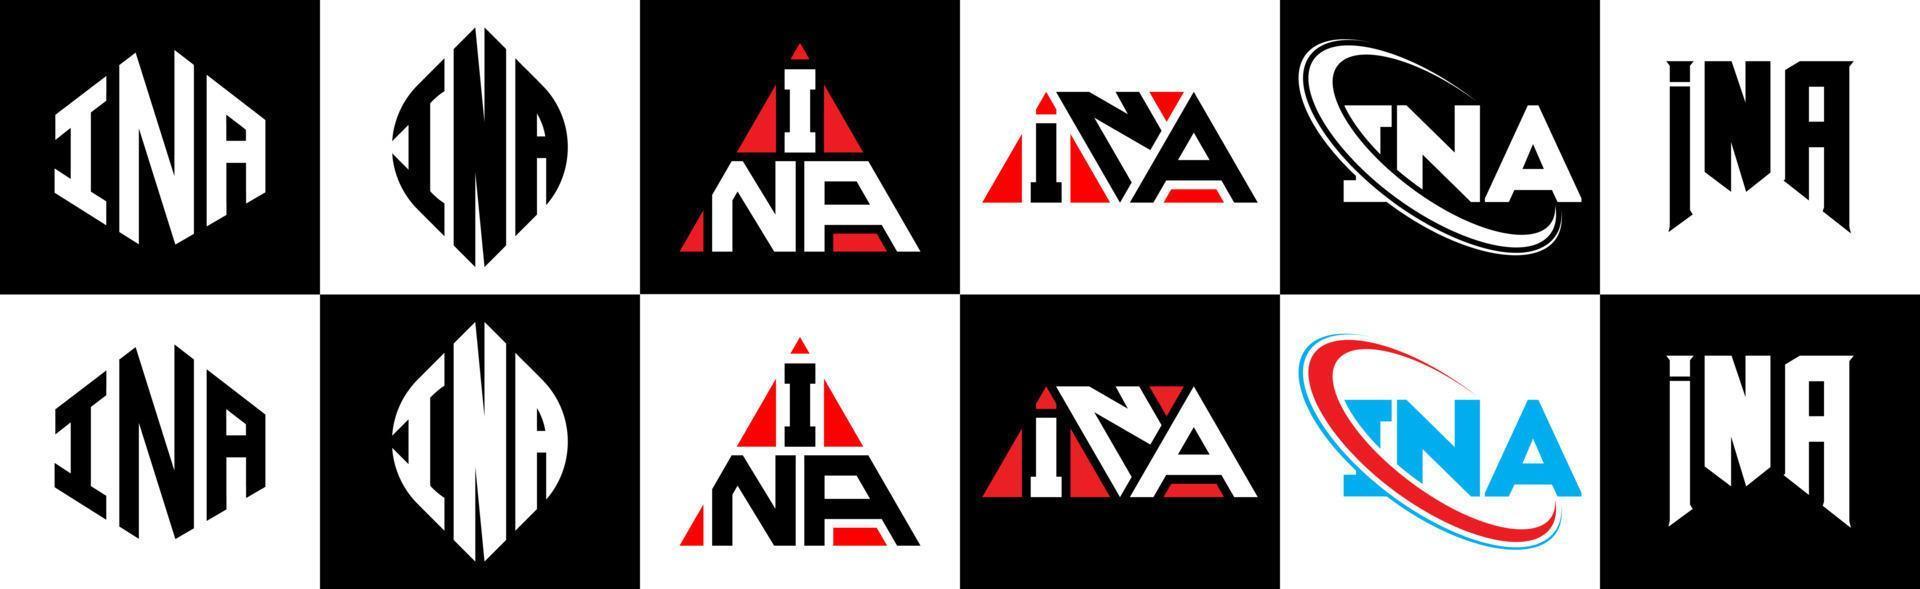 INA letter logo design in six style. INA polygon, circle, triangle, hexagon, flat and simple style with black and white color variation letter logo set in one artboard. INA minimalist and classic logo vector